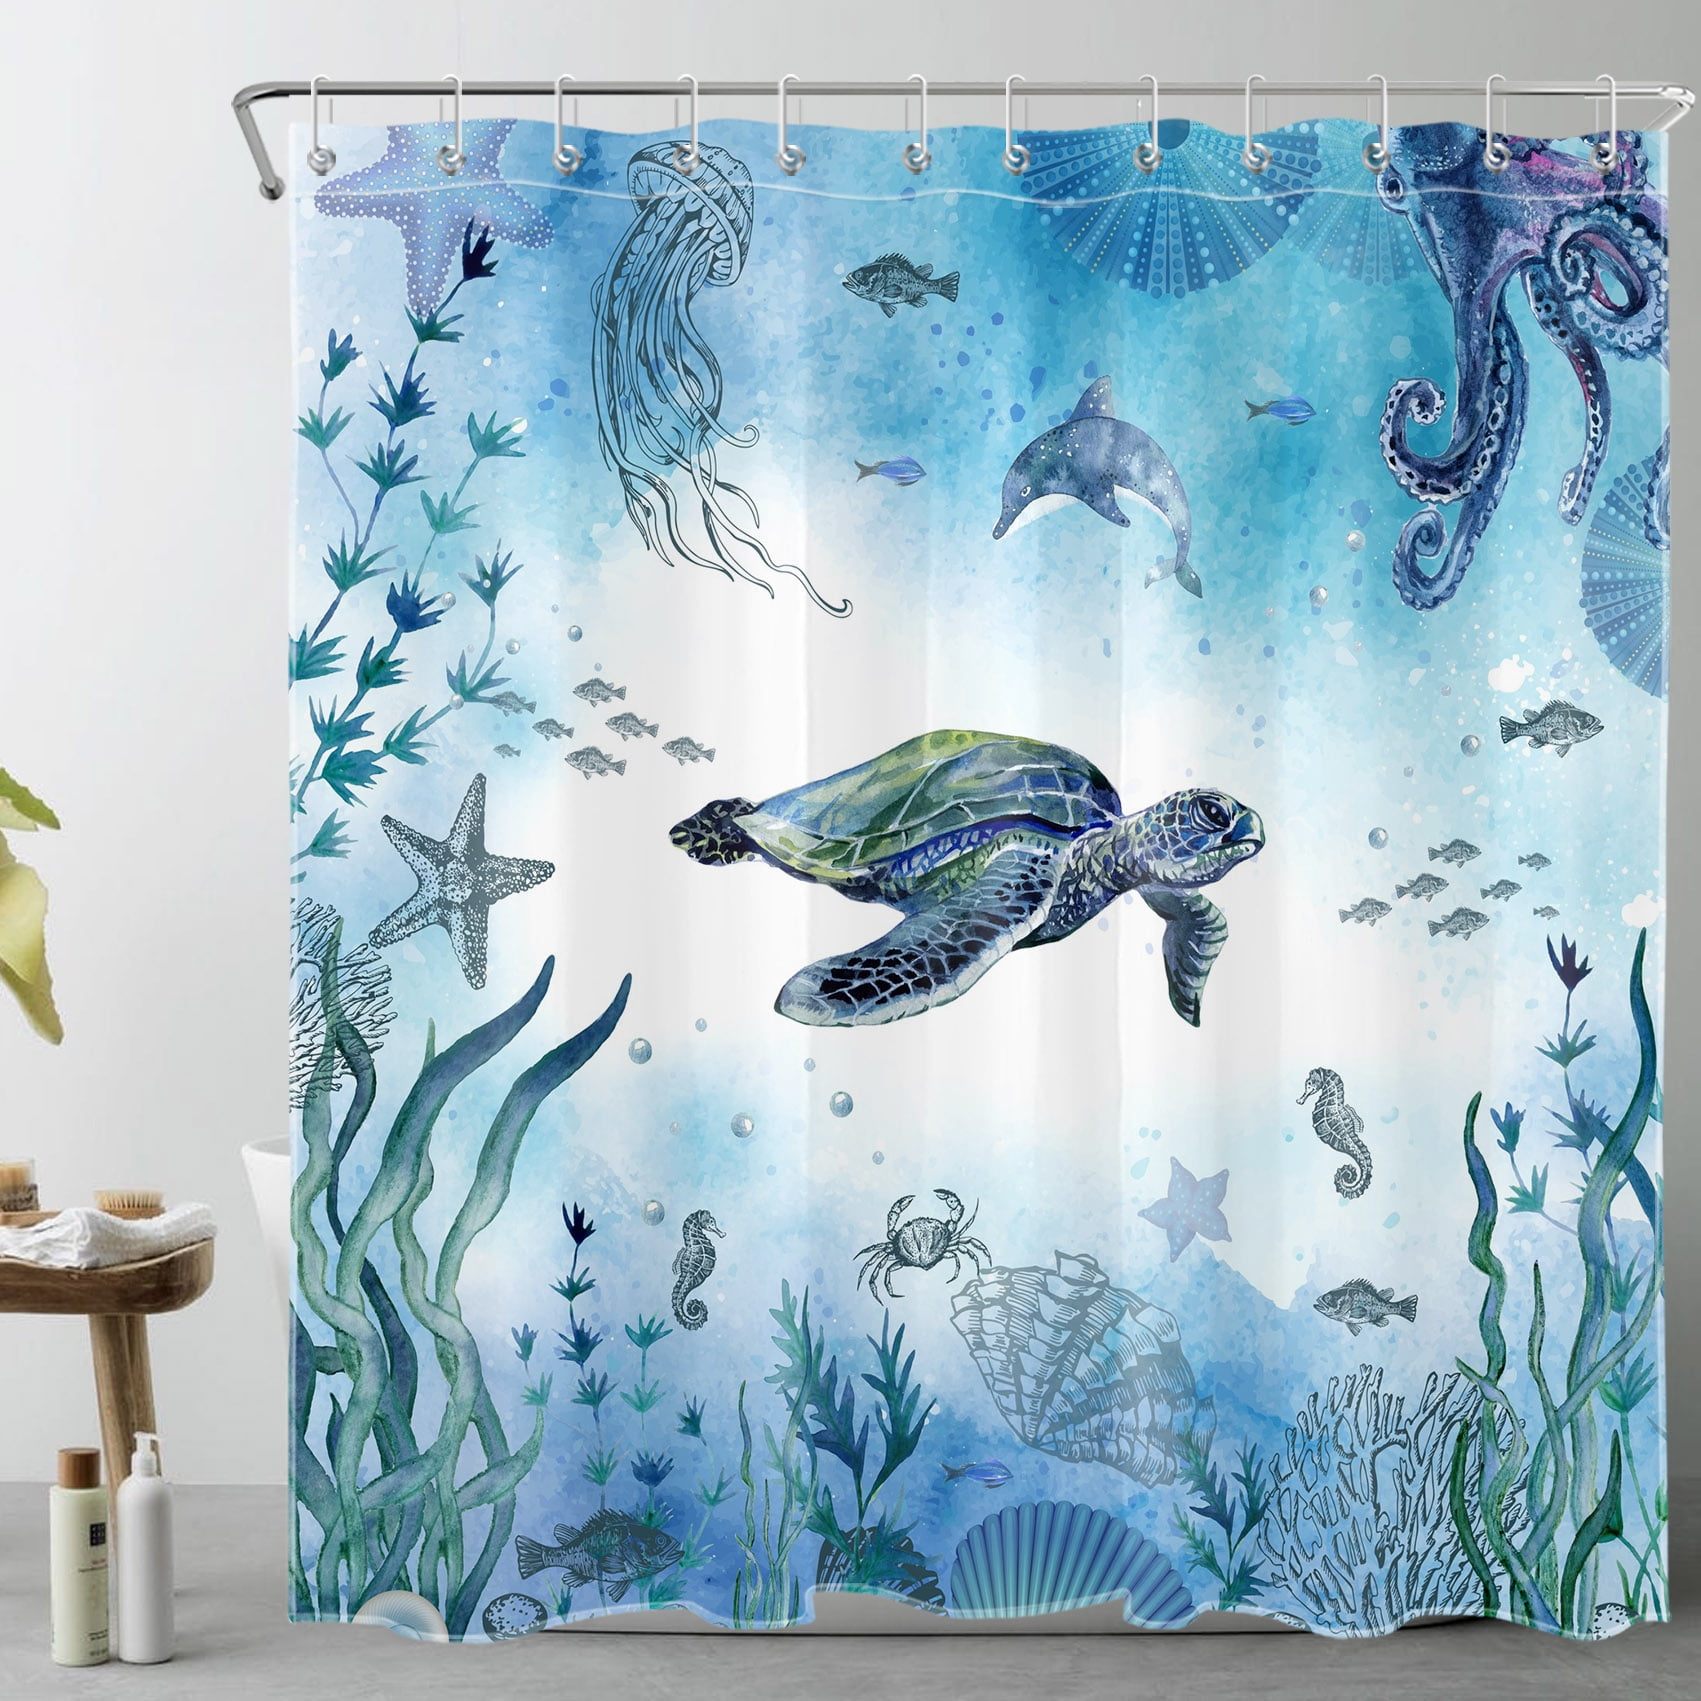 HVEST Funny Sea Turtle Shower Curtain for Bathroom Wild Marine Life  Jellyfish Octopus and Dolphin Coral Bathroom Shower Curtains with Hooks